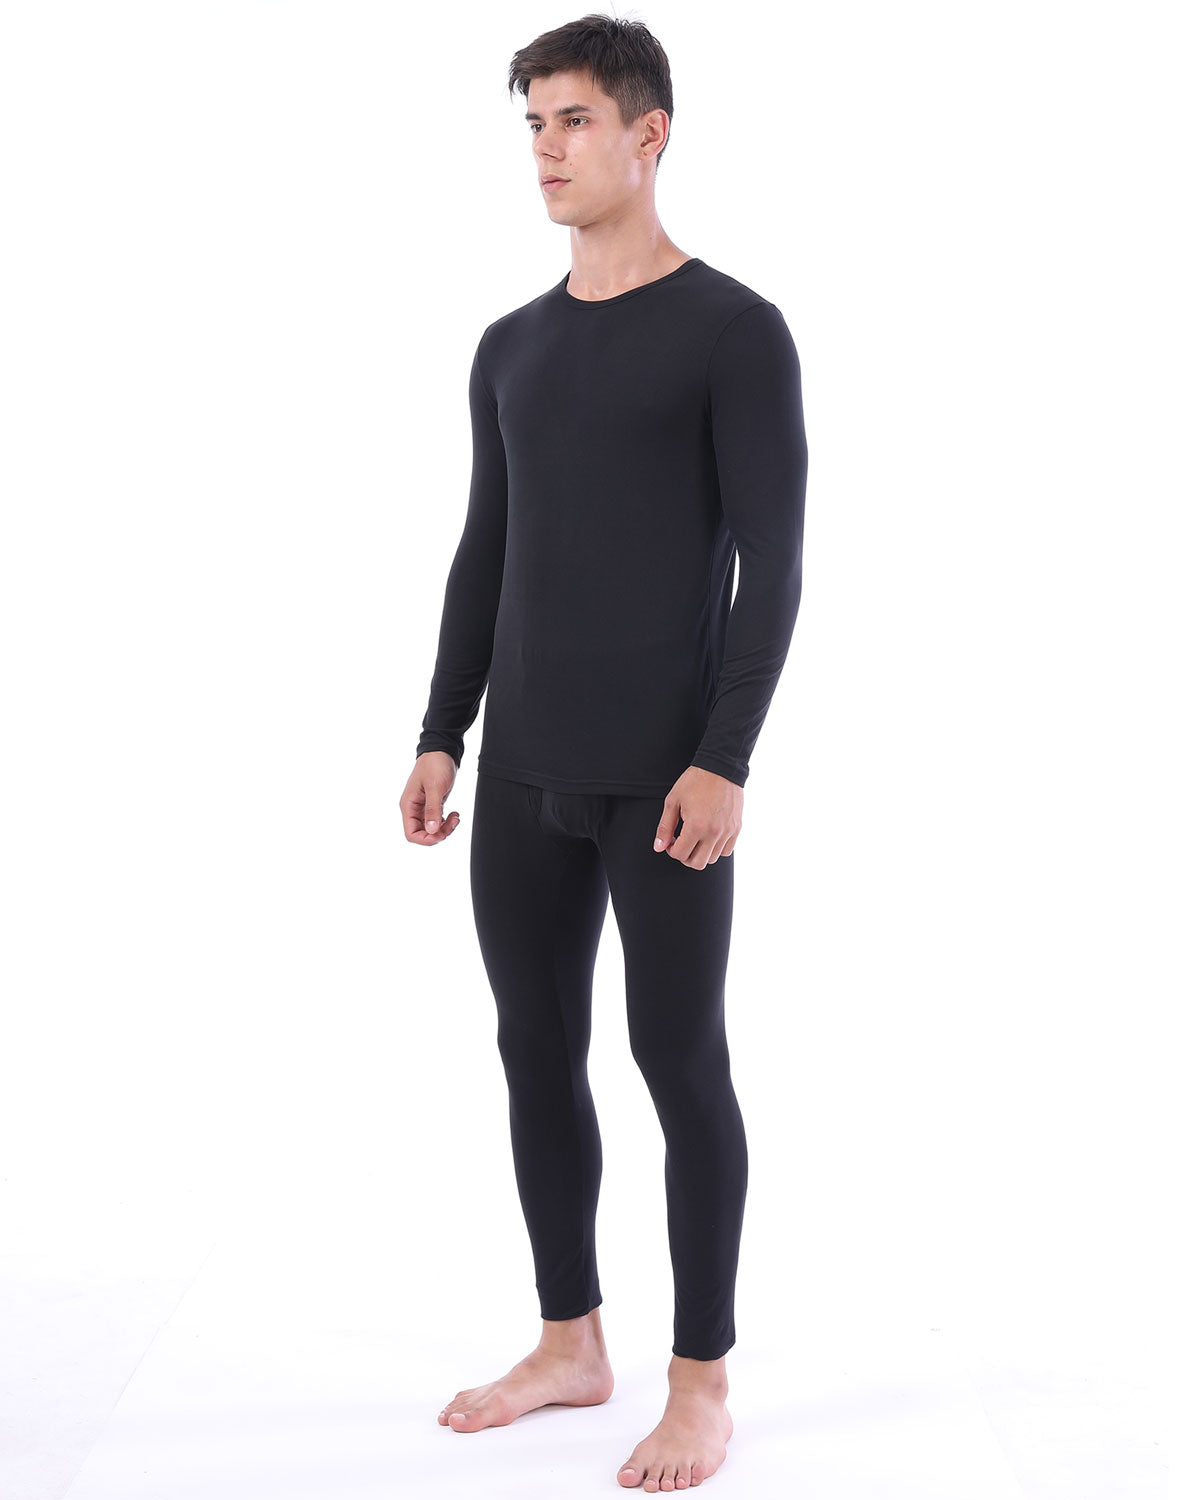 Thermal Underwear Set for Men Sport Base Layer Long Johns for Skiing  Running